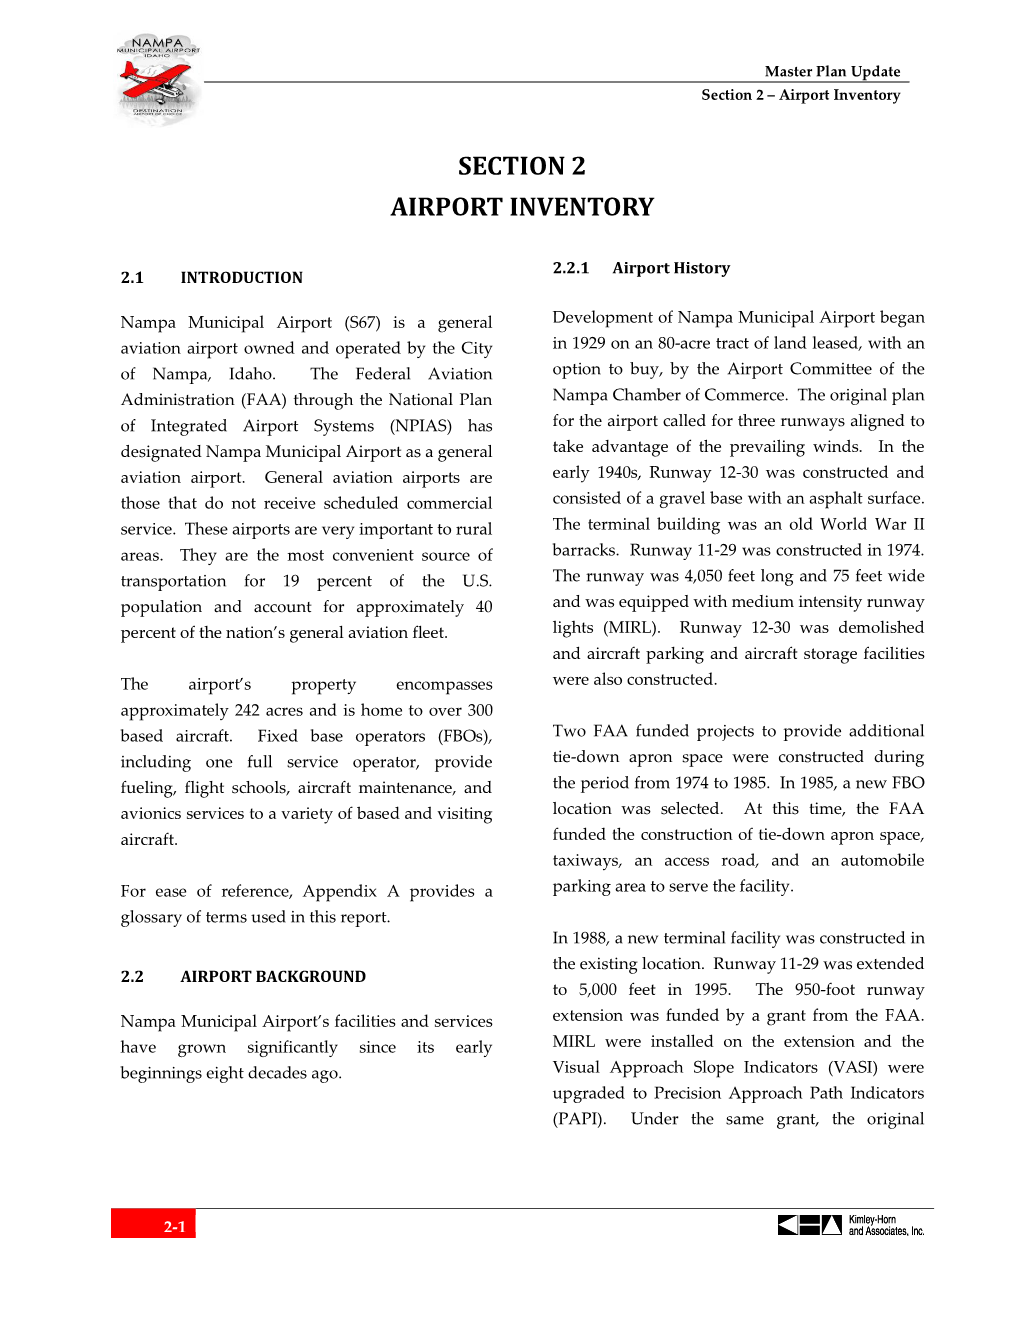 Section 2 Airport Inventory